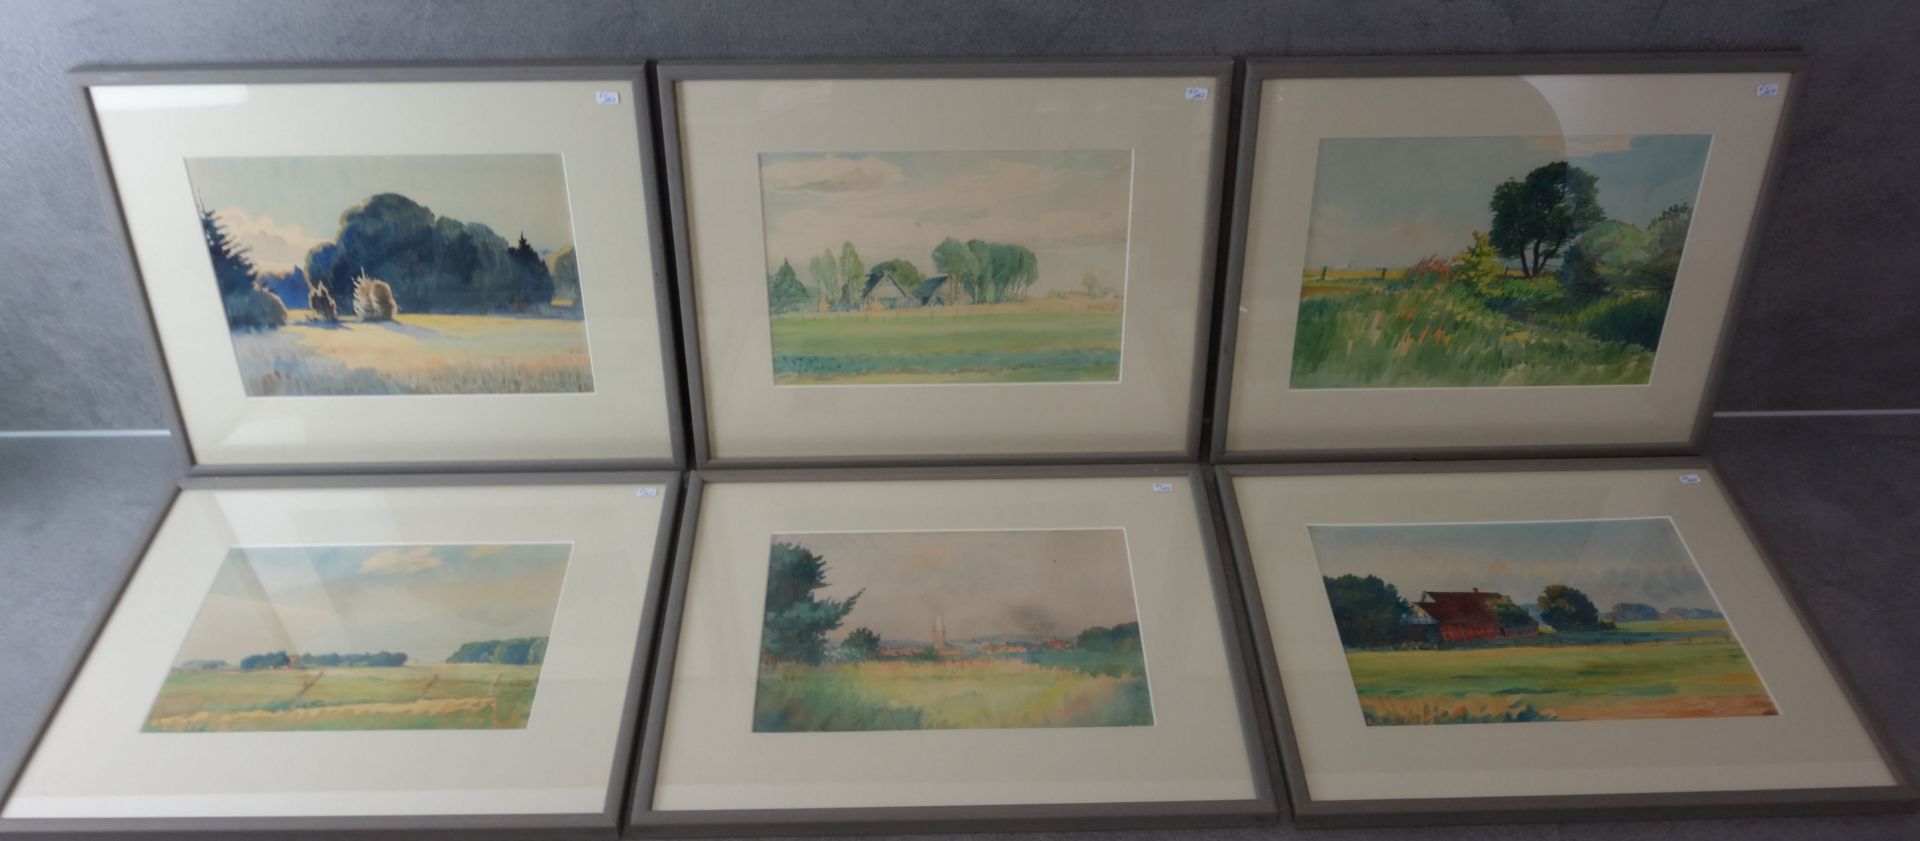 6 THEODOR DOEBNER - WATERCOLORS AND 2 DRAWINGS